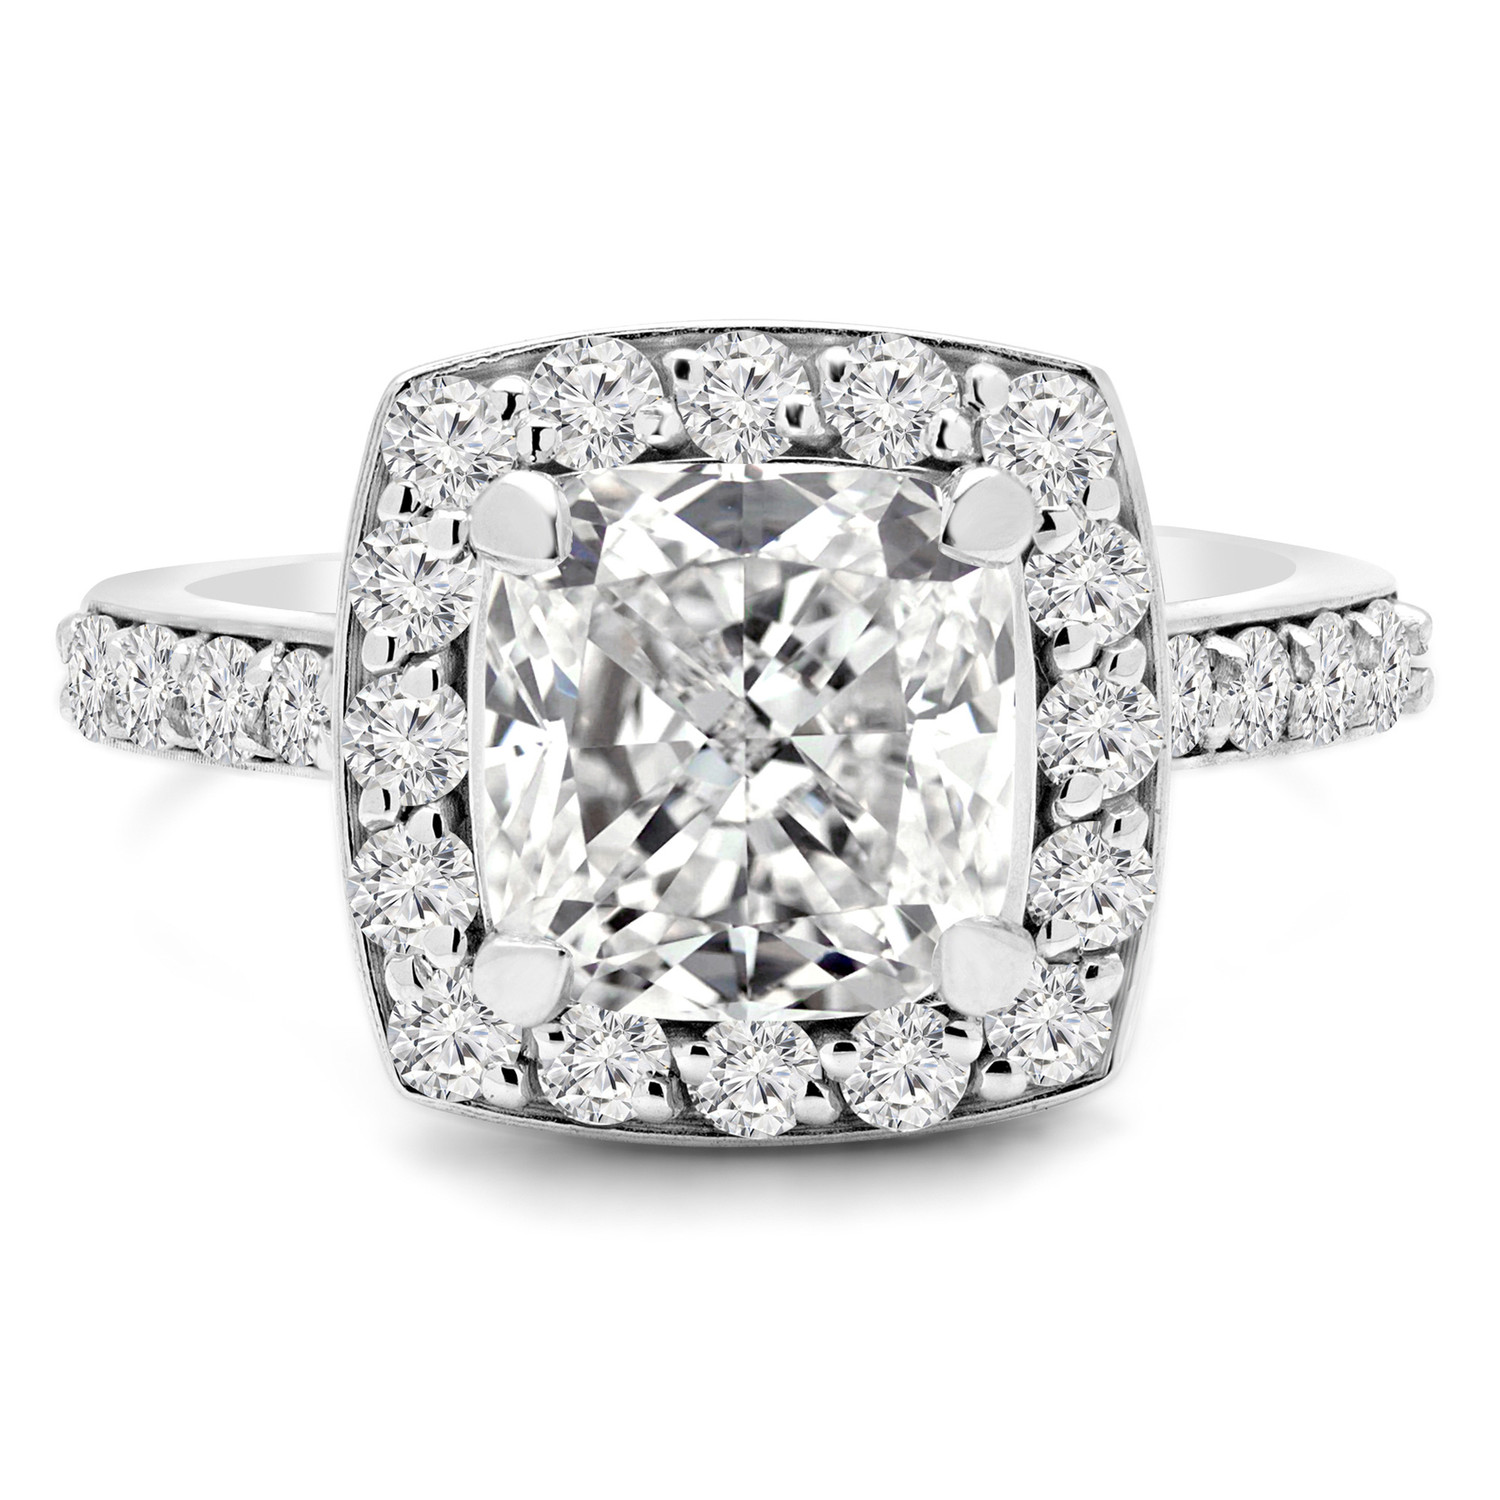 3 1/6 CTW Cushion Diamond Halo Engagement Ring in 14K White Gold (MD160380)